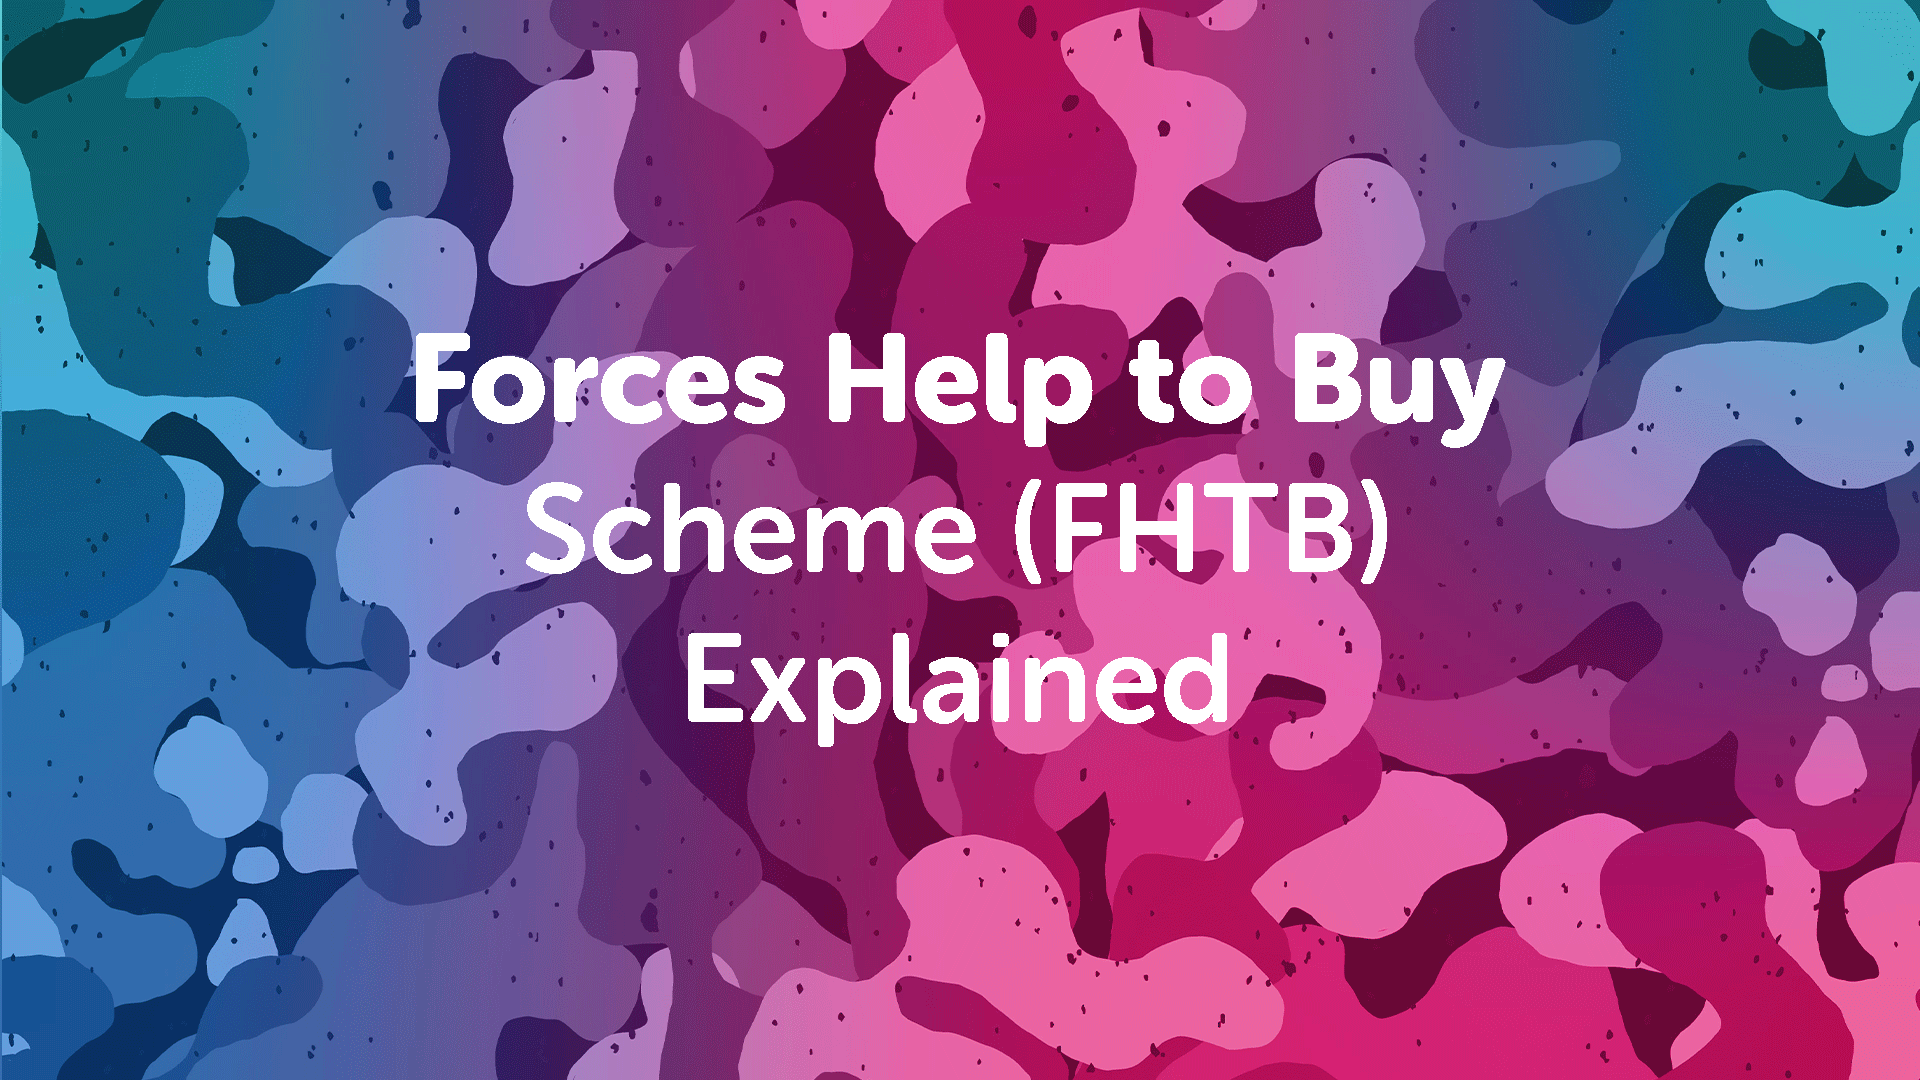 Forces Help to Buy Scheme (FHTB) Explained